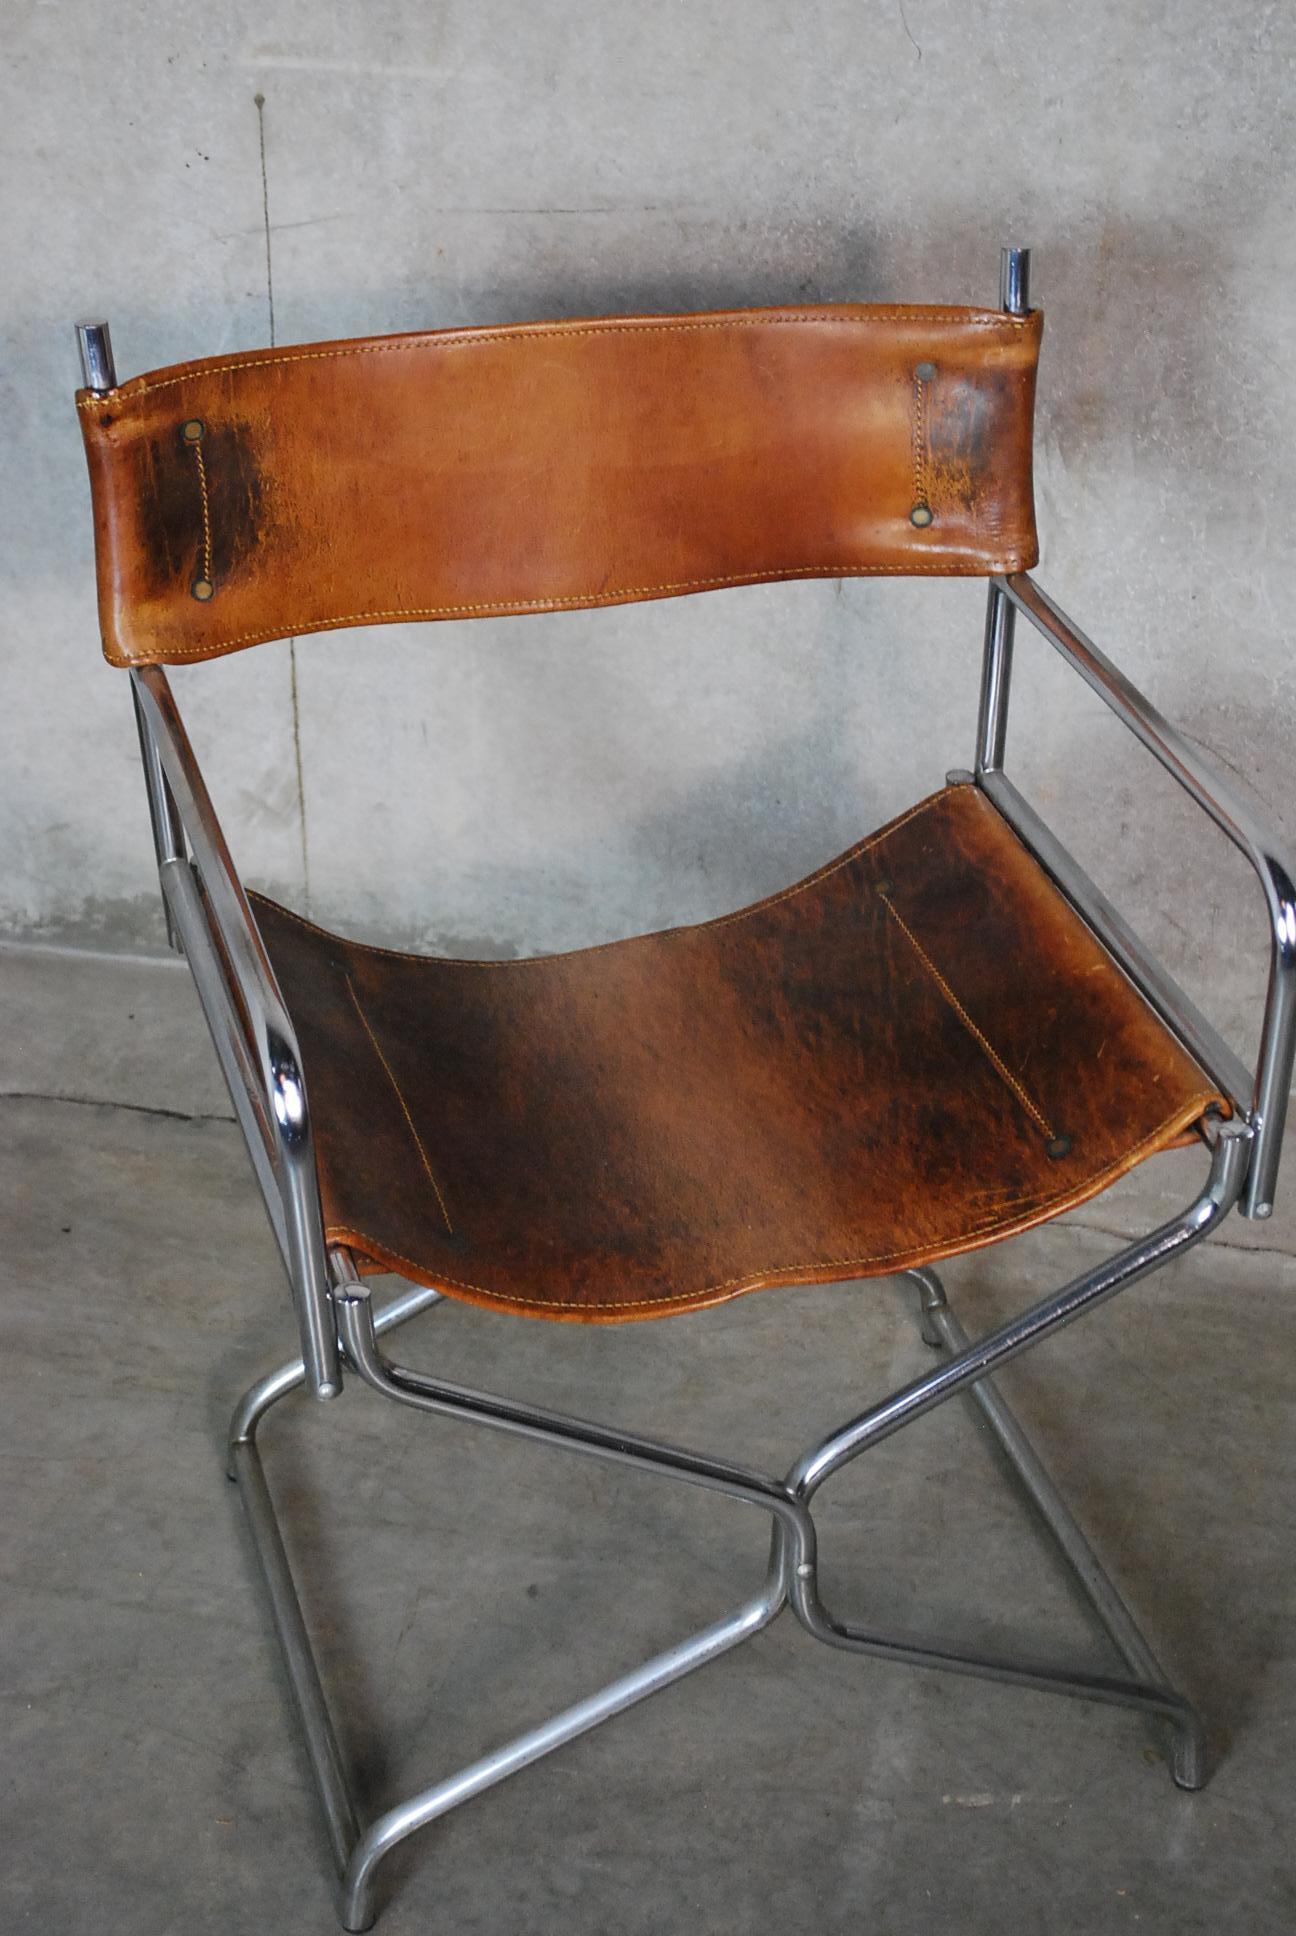 A pair of solid leather/ chrome folding safari chairs acquired from private collection in Vancouver. These items were apparently purchased in NYC in 1960s and shipped to BC.
Leather is thick and solid with no tears or weak spots. Maker unknown.